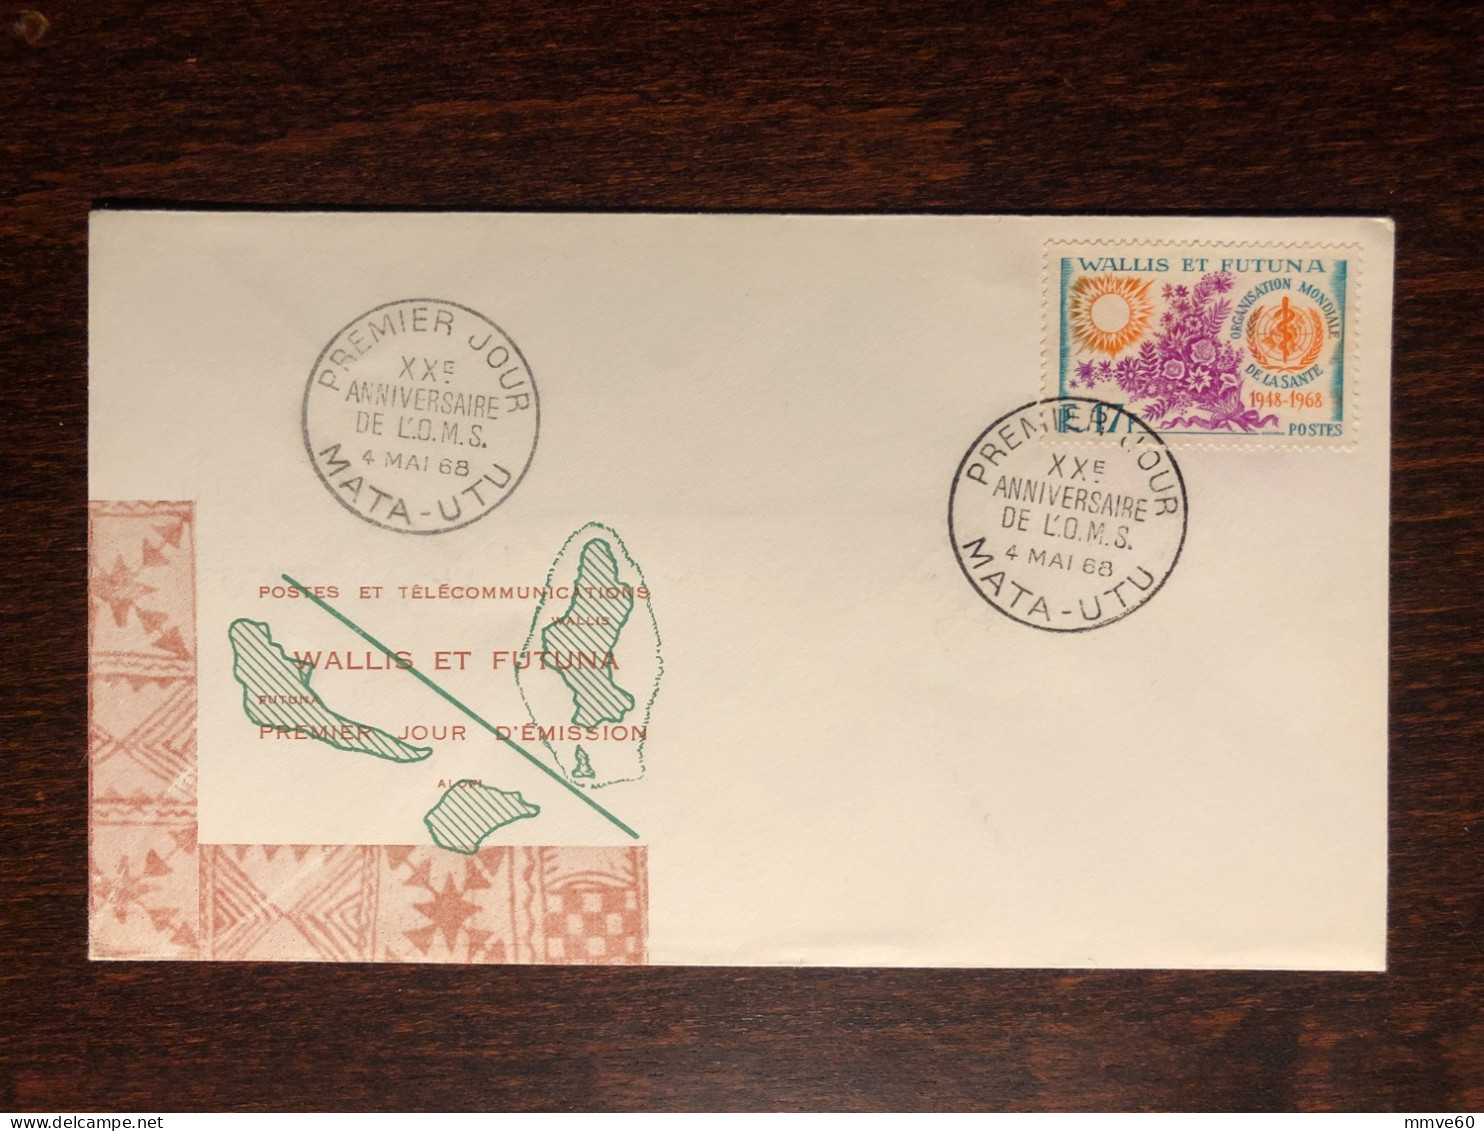 WALLIS & FUTUNA FDC COVER 1968 YEAR WHO HEALTH MEDICINE STAMPS - Covers & Documents